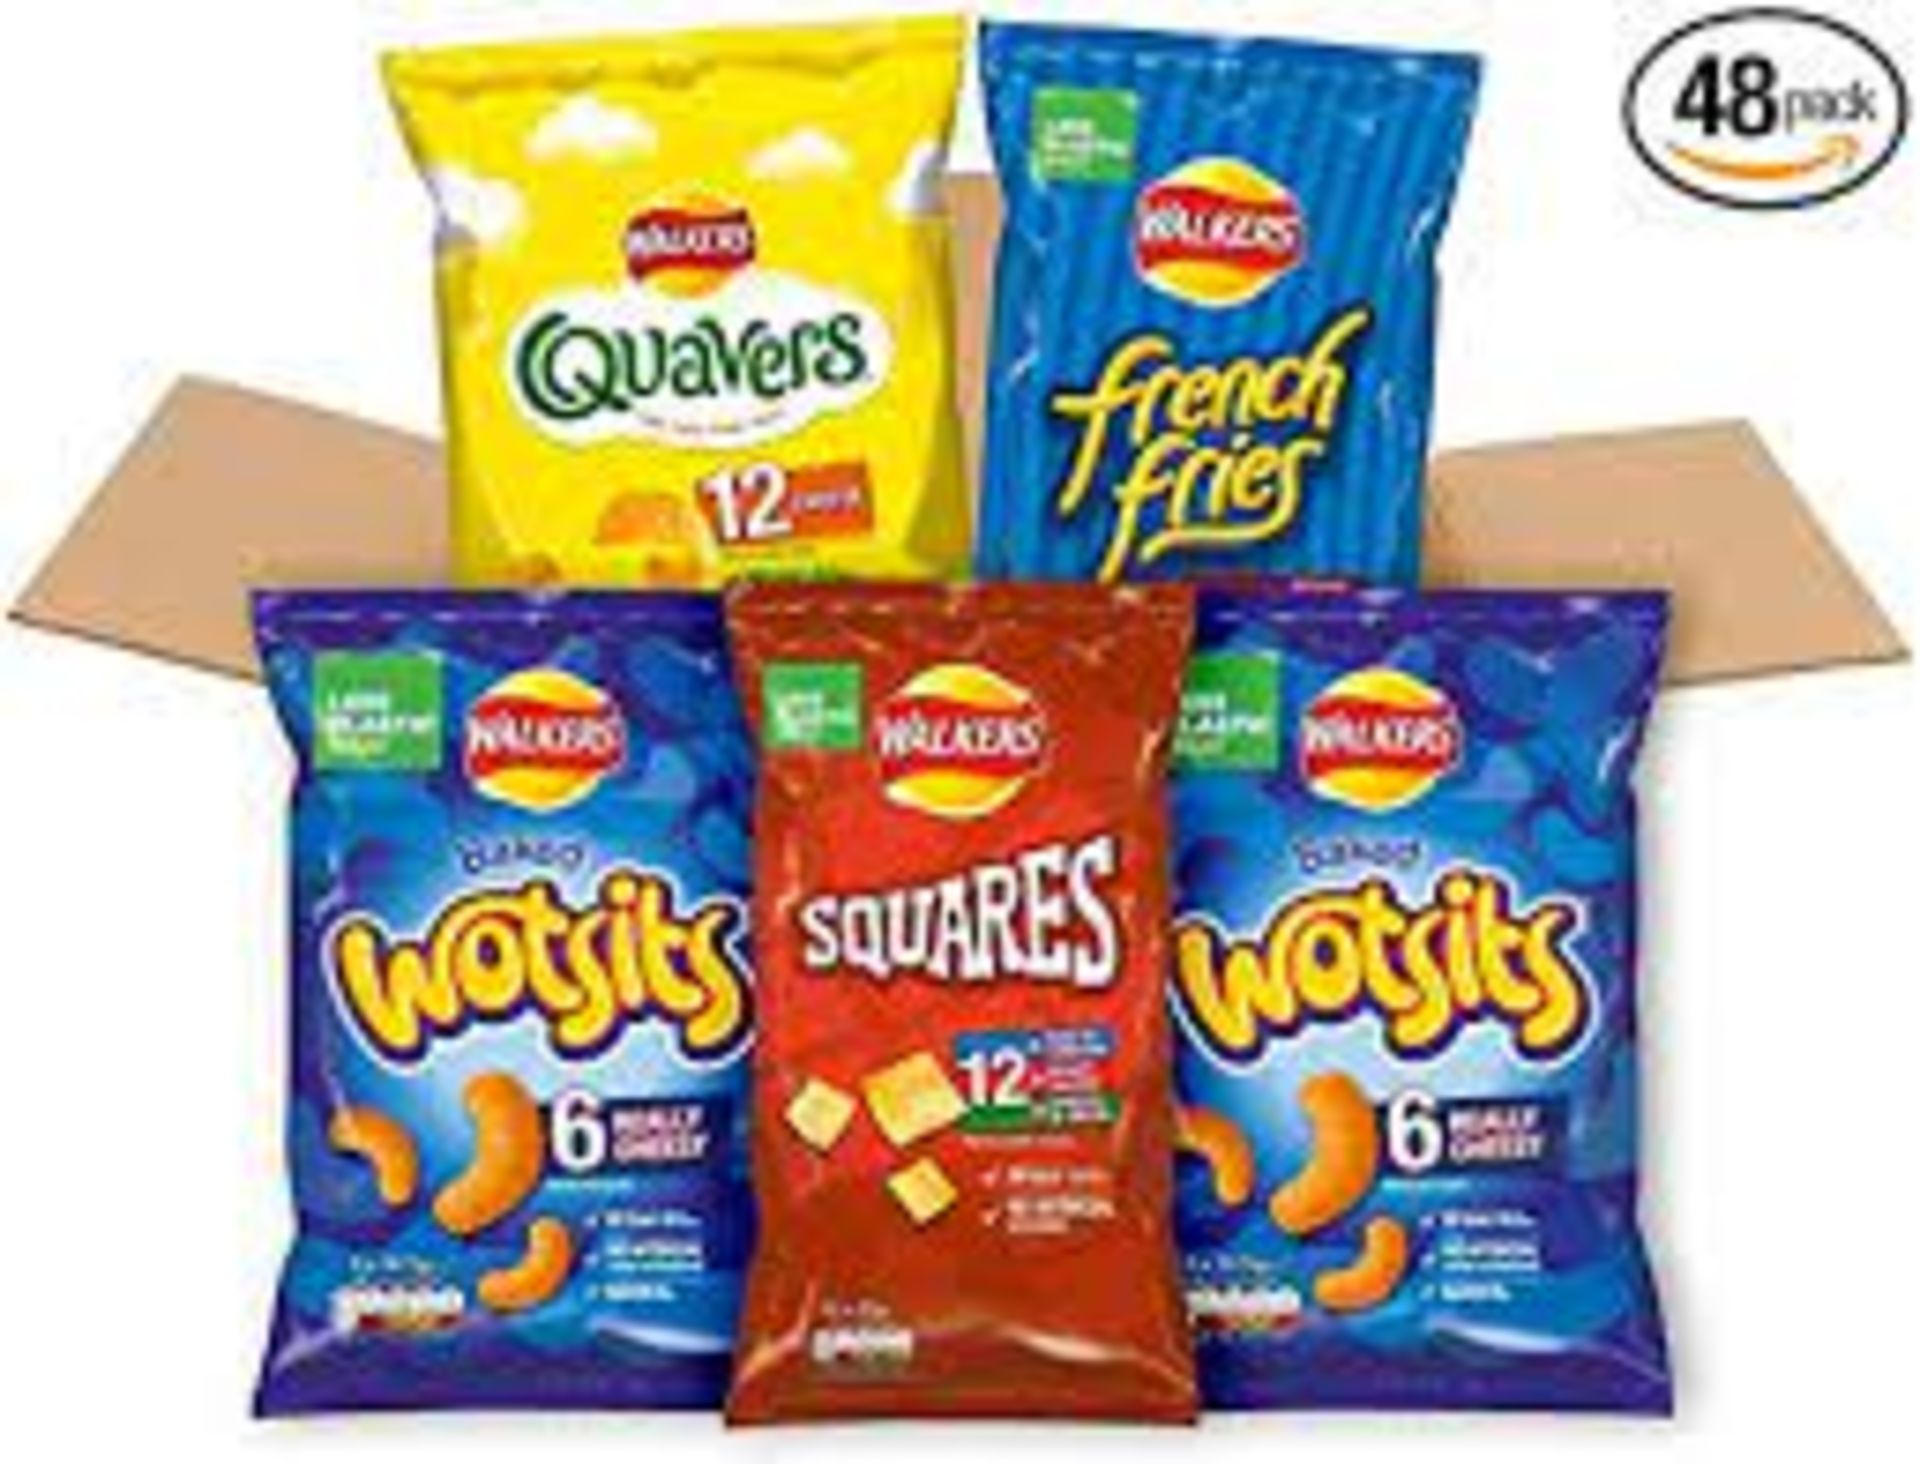 RRP £178 (Approx. Count 13) spW14N0124g 13 x Walkers Under 100 Calories Crisps Snack Box | Wotsits |